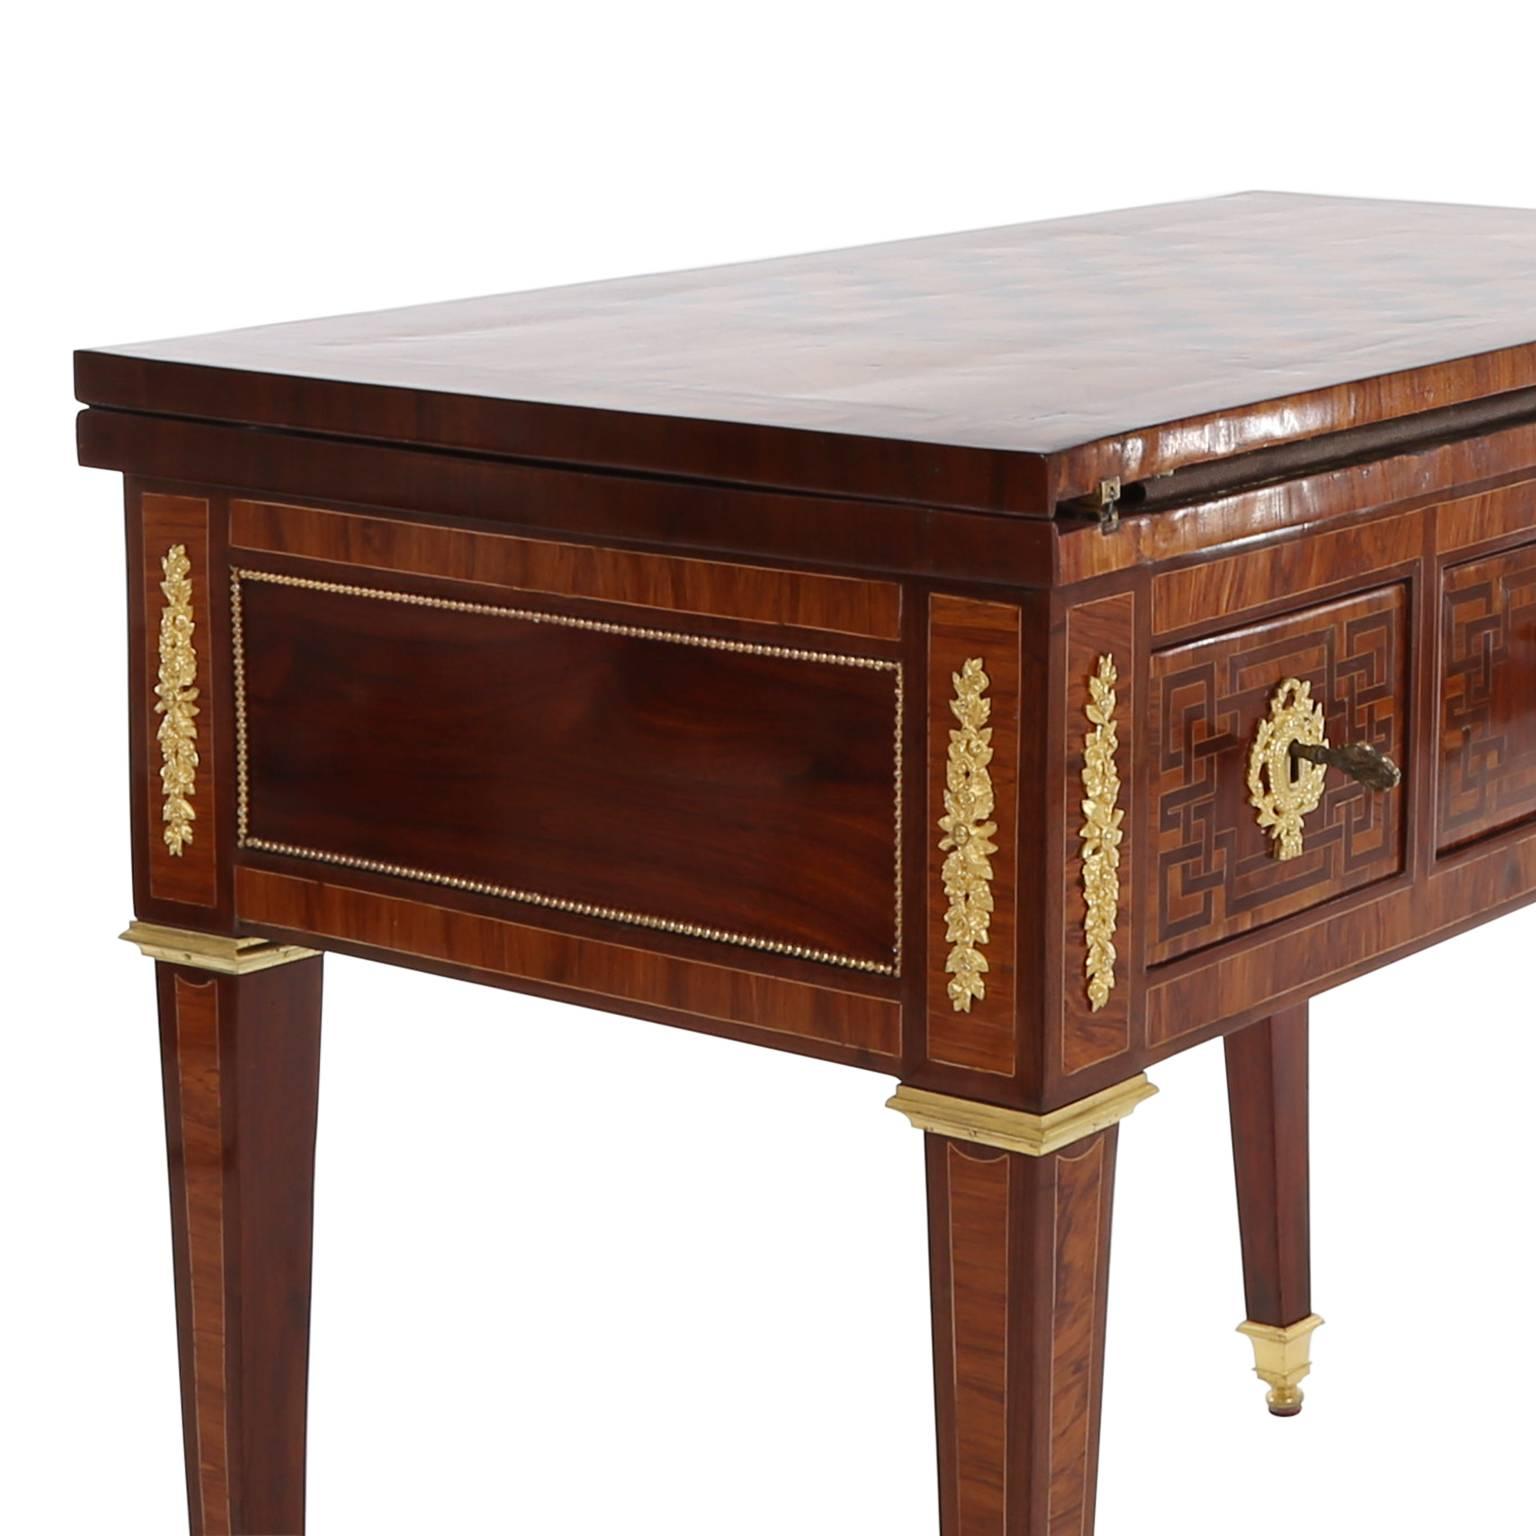 Outstanding transformation table with an integrated chessboard on the top of the plate. Convertible to a card table with square table top covered with cognac-colored leather and gold ornaments. Hinged reading desk. Stamped with N. PETIT as well as